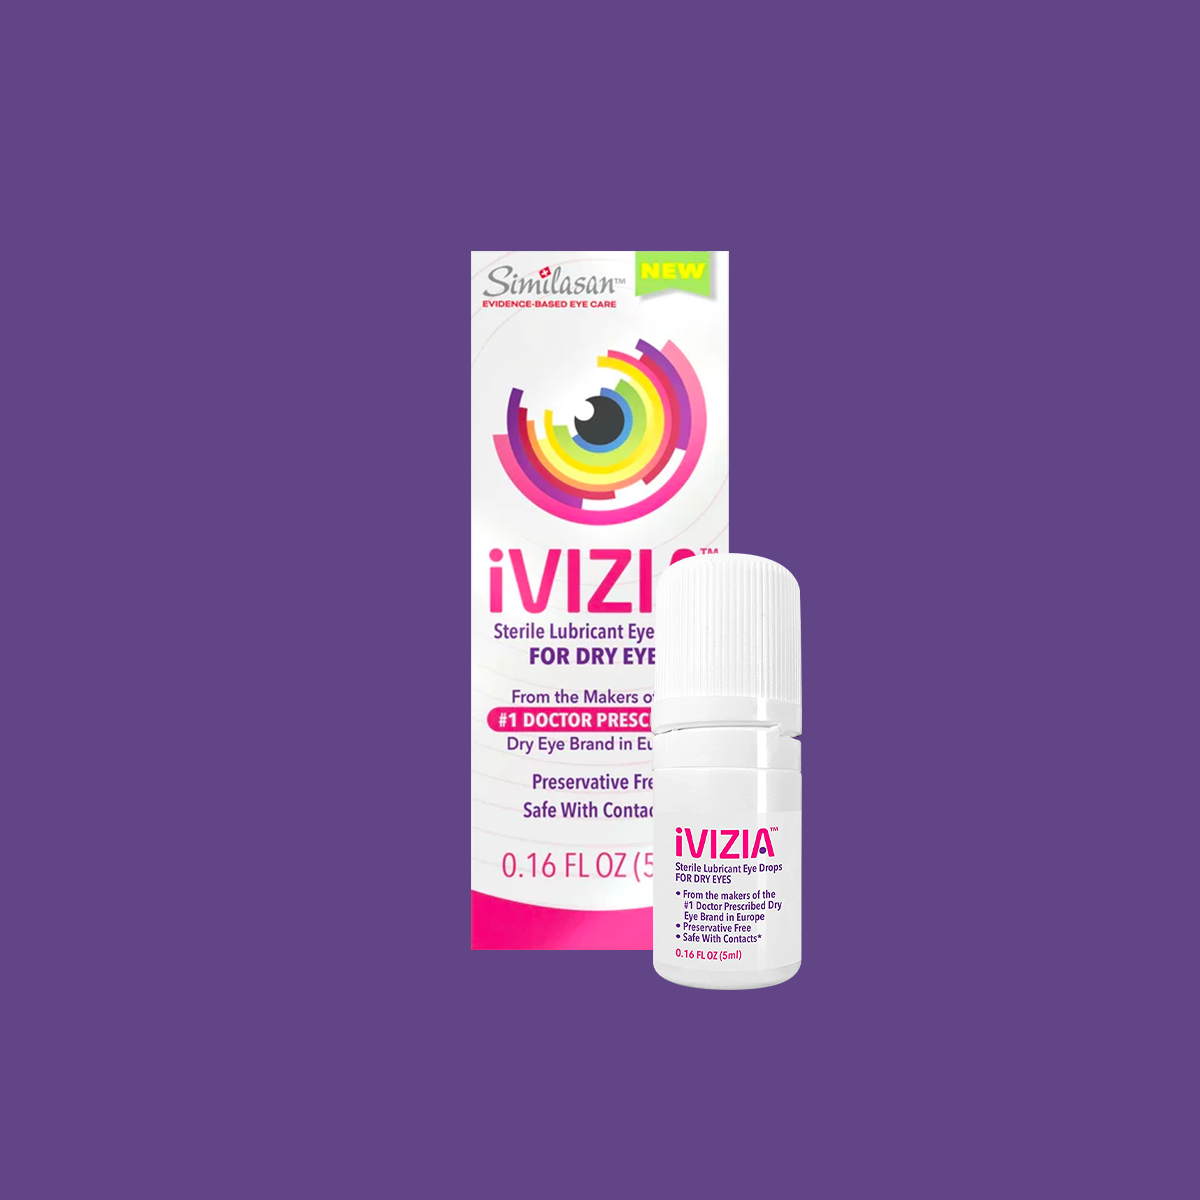 iVIZIA Sterile Lubricant Eye Drops for Dry Eyes, Preservative-Free, Dry Eye Relief, Contact Lens Friendly, 0.17 fl oz (5ml bottle)